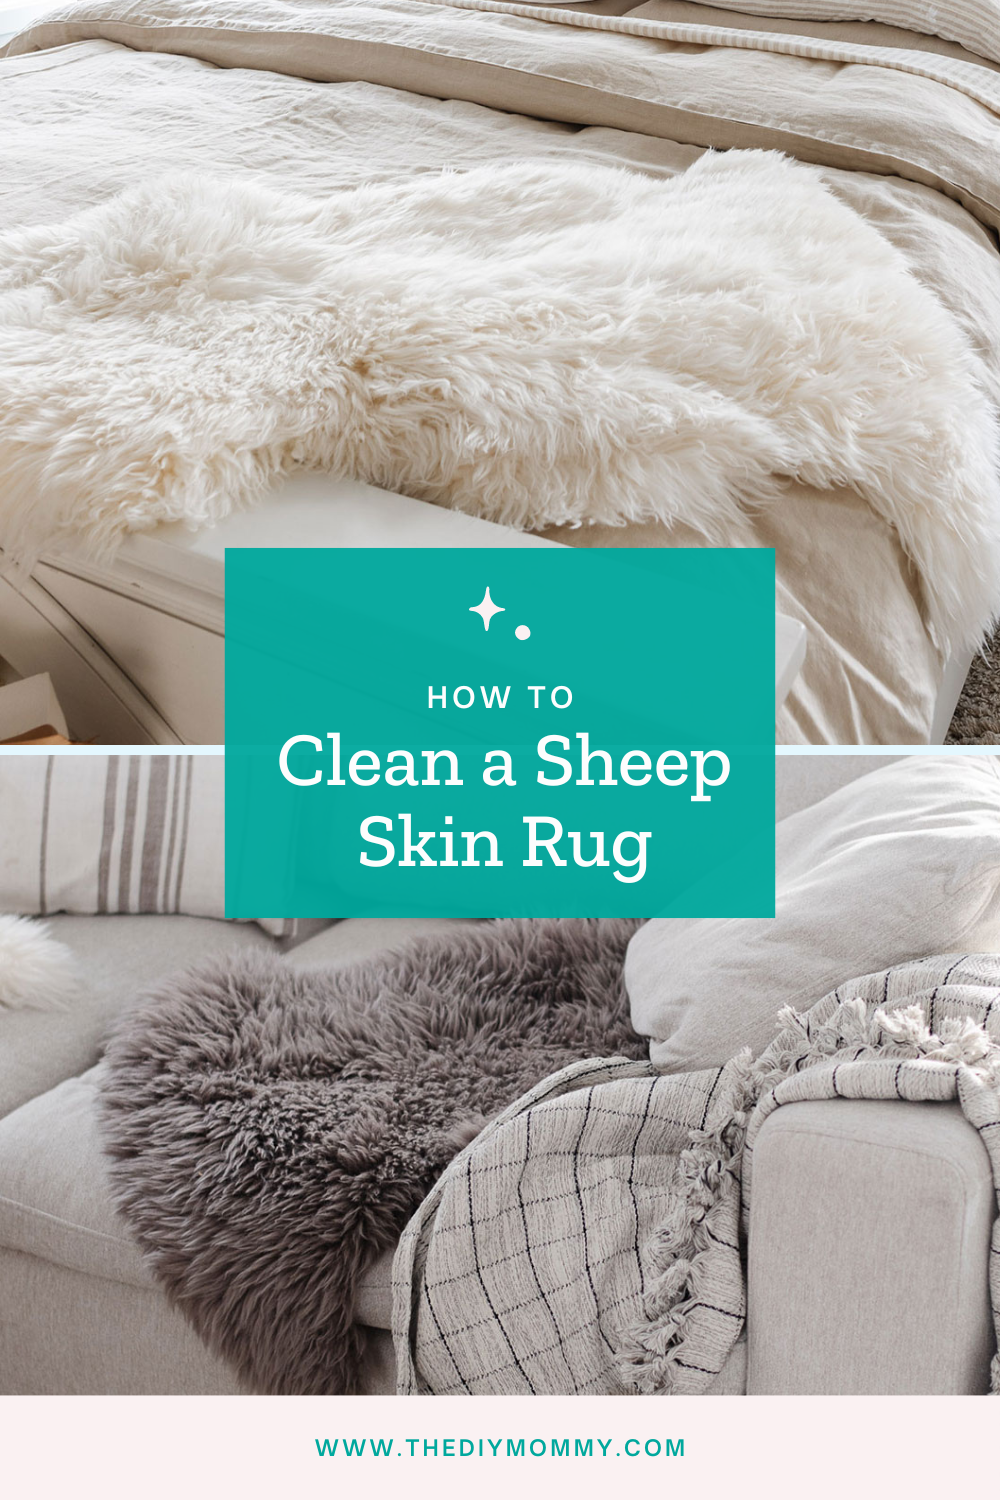 How to Clean a Sheep Skin Rug to Keep it Looking New